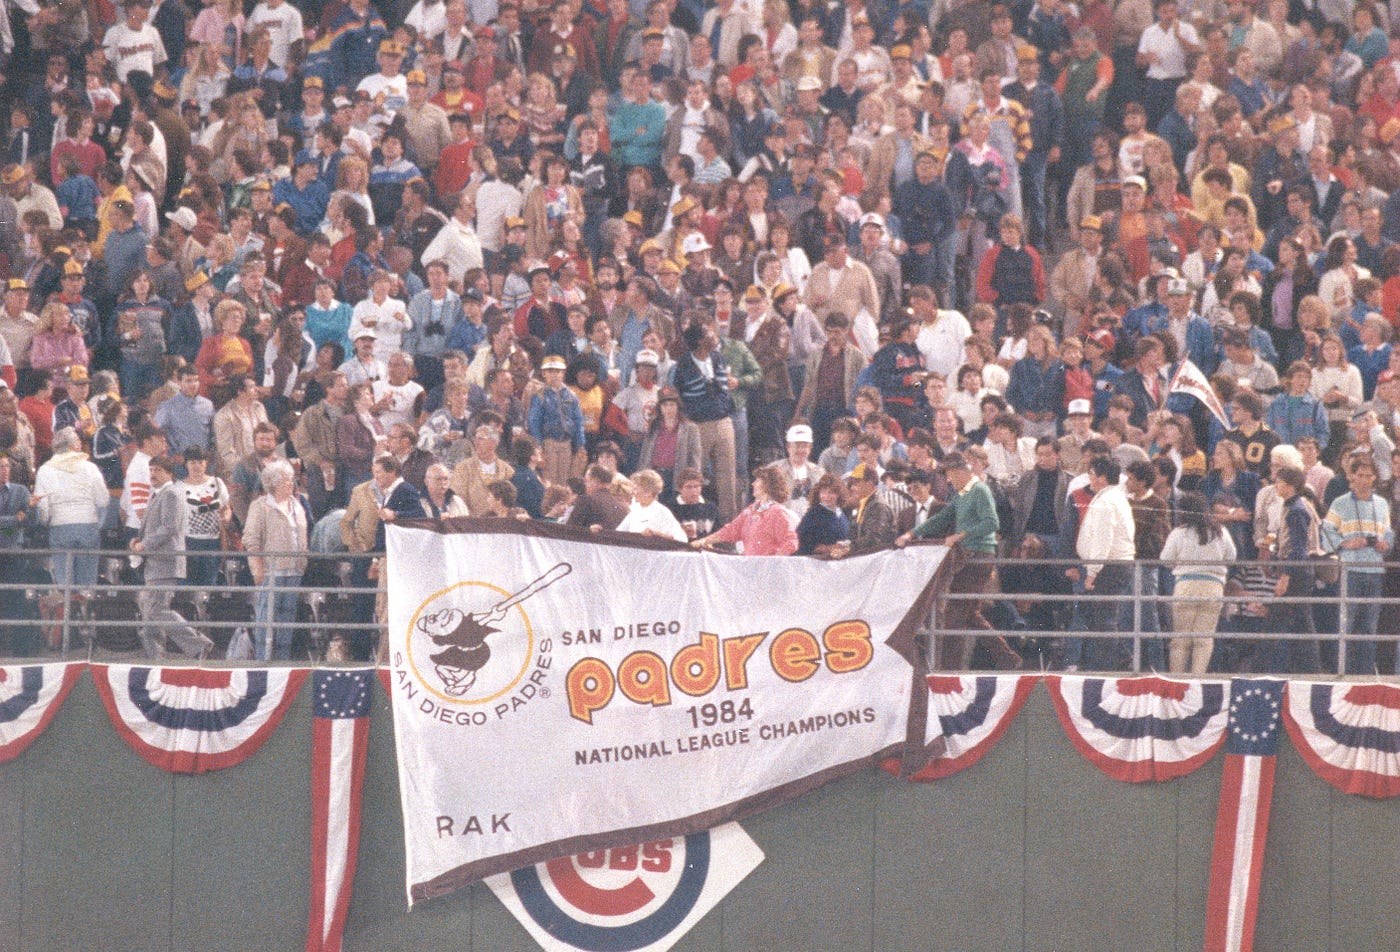 Defeating Cubs to win 1984 National League title №8 on my list of